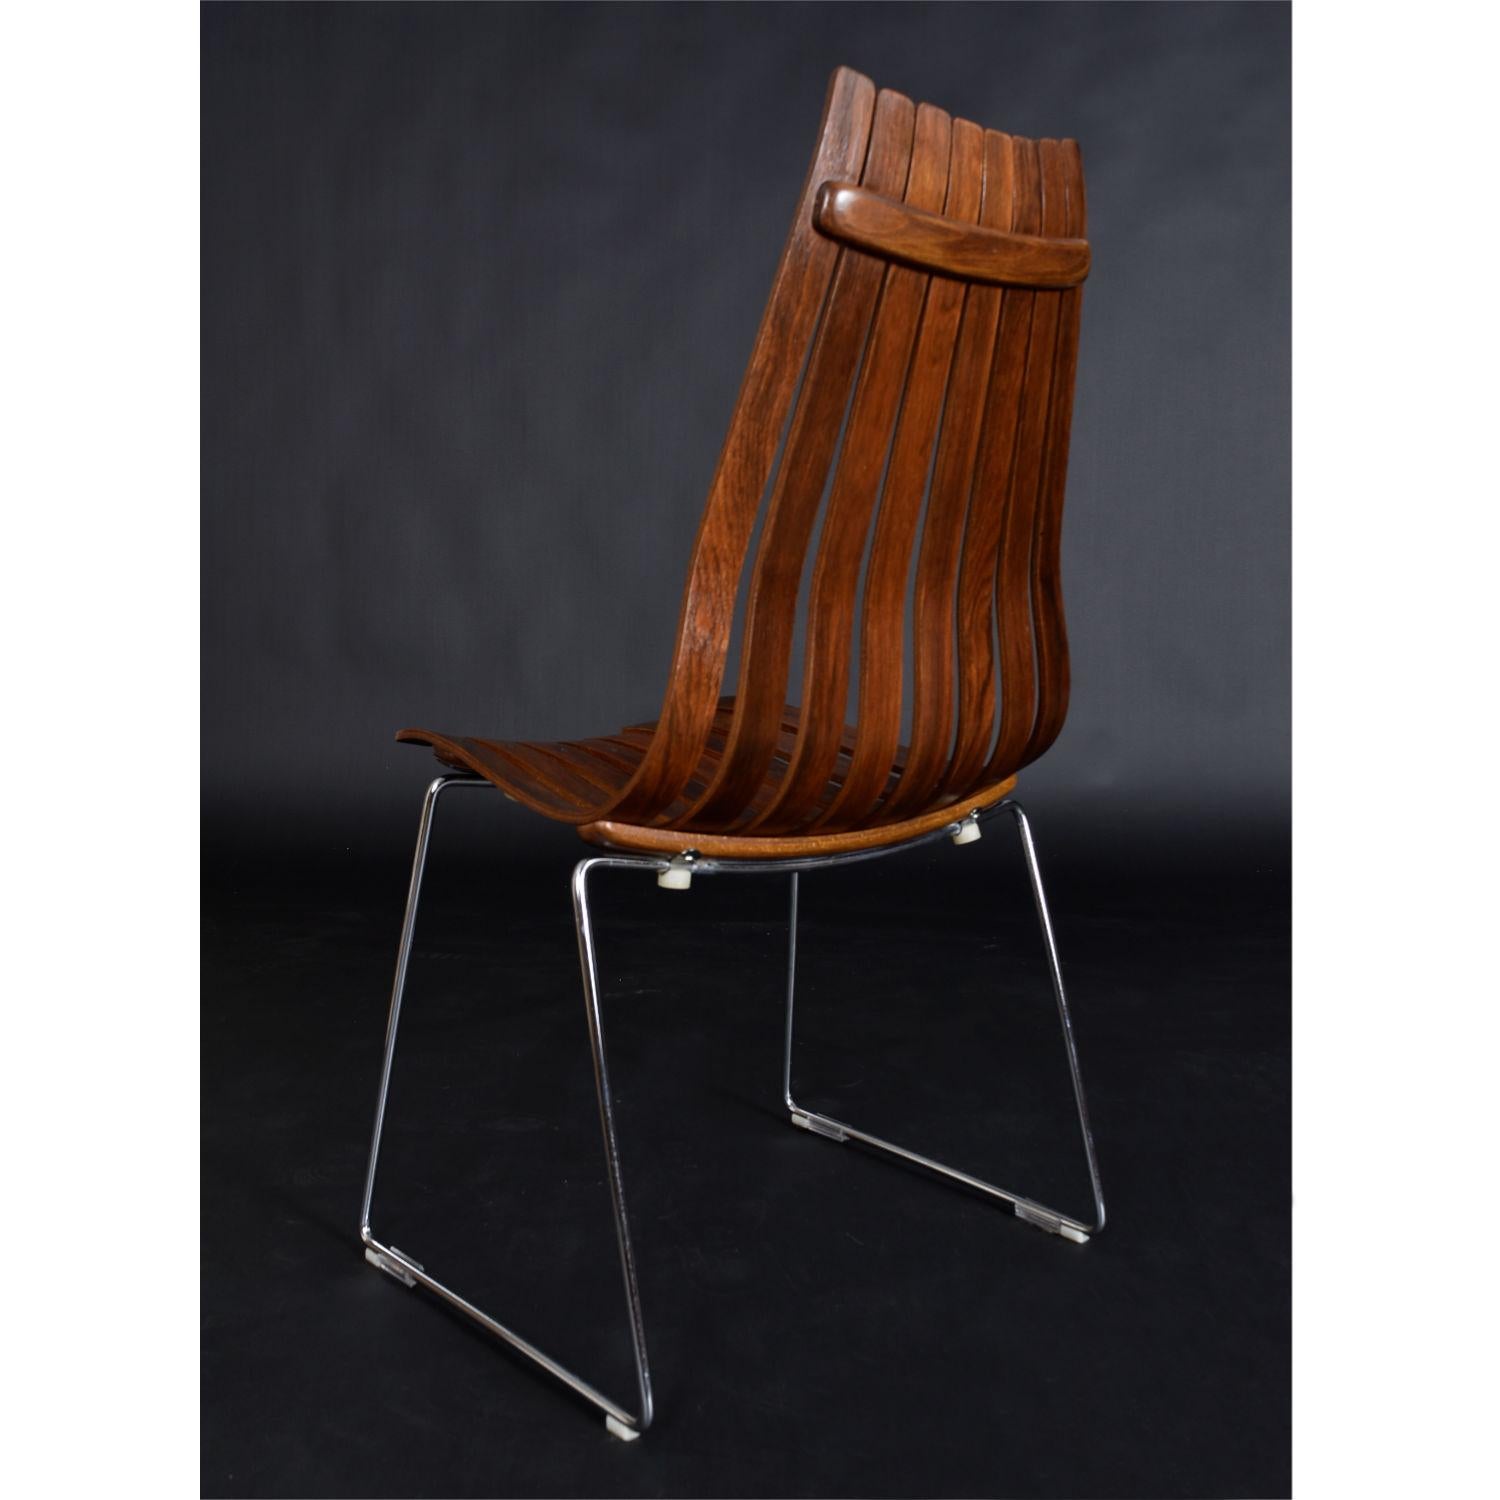 Mid-20th Century Hans Brattrud Rosewood Scandia Dining Chairs by Hove Mobler of Norway